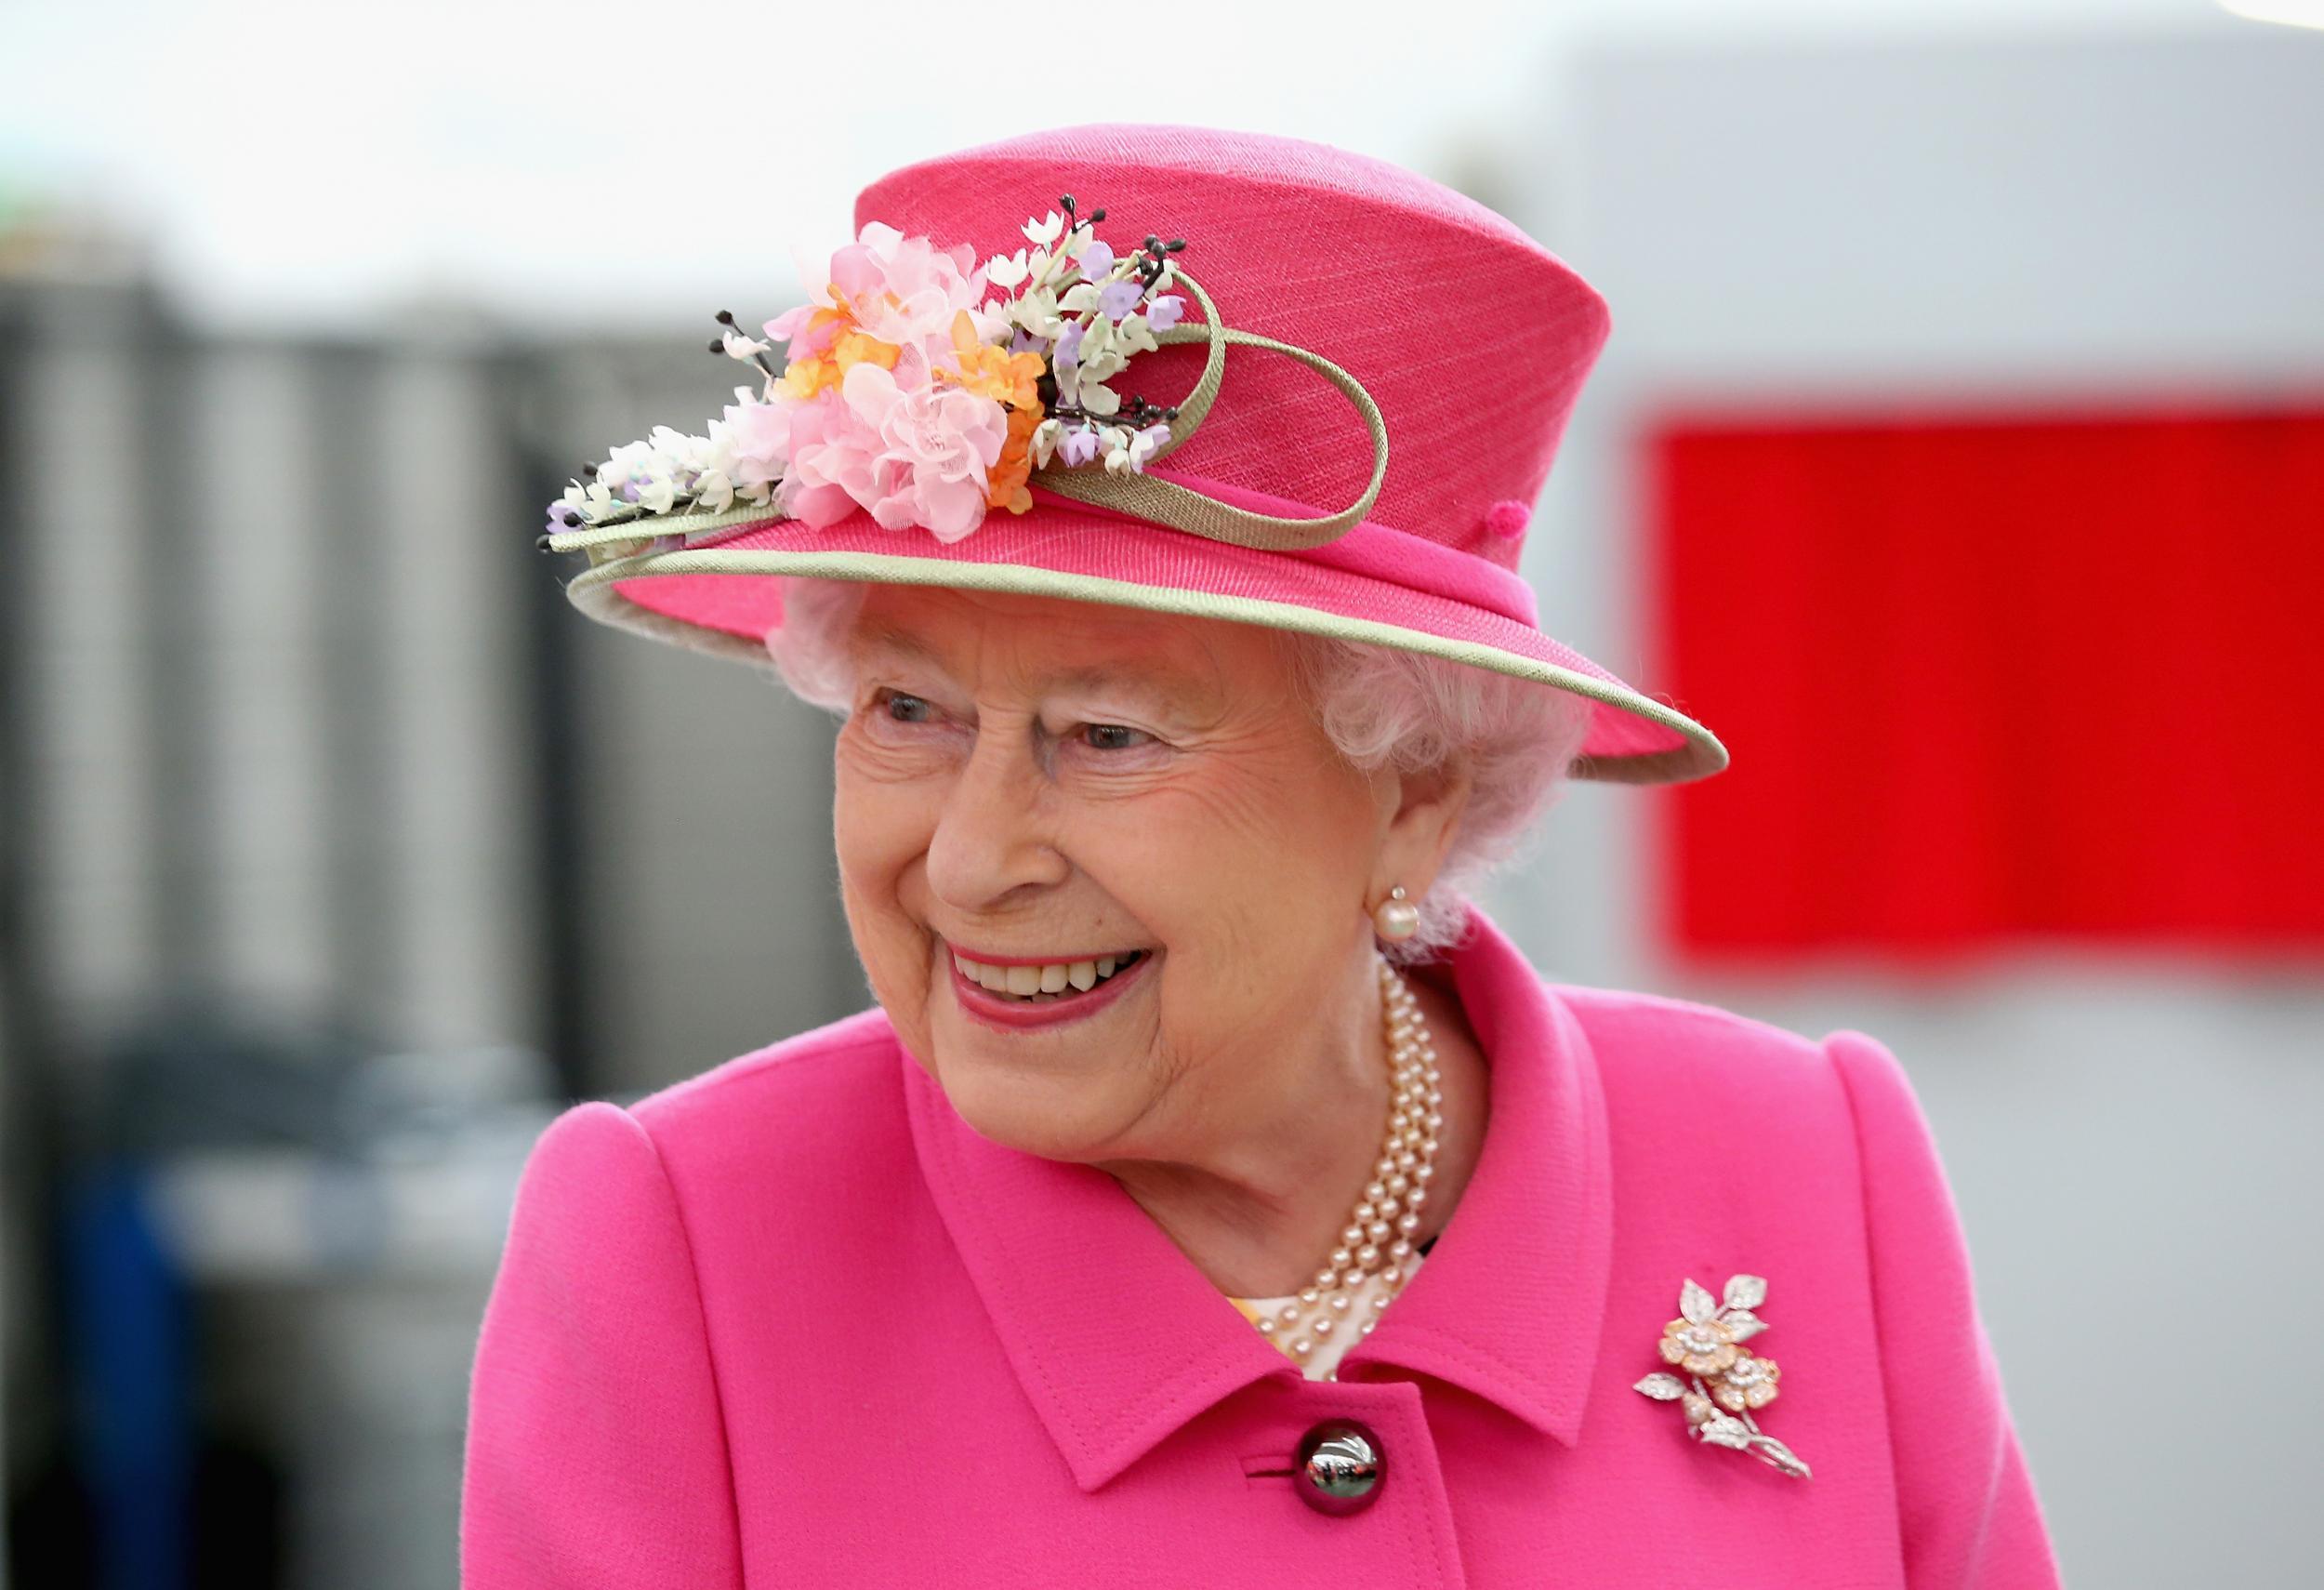 The Queen wears bright colours so she is easily visible